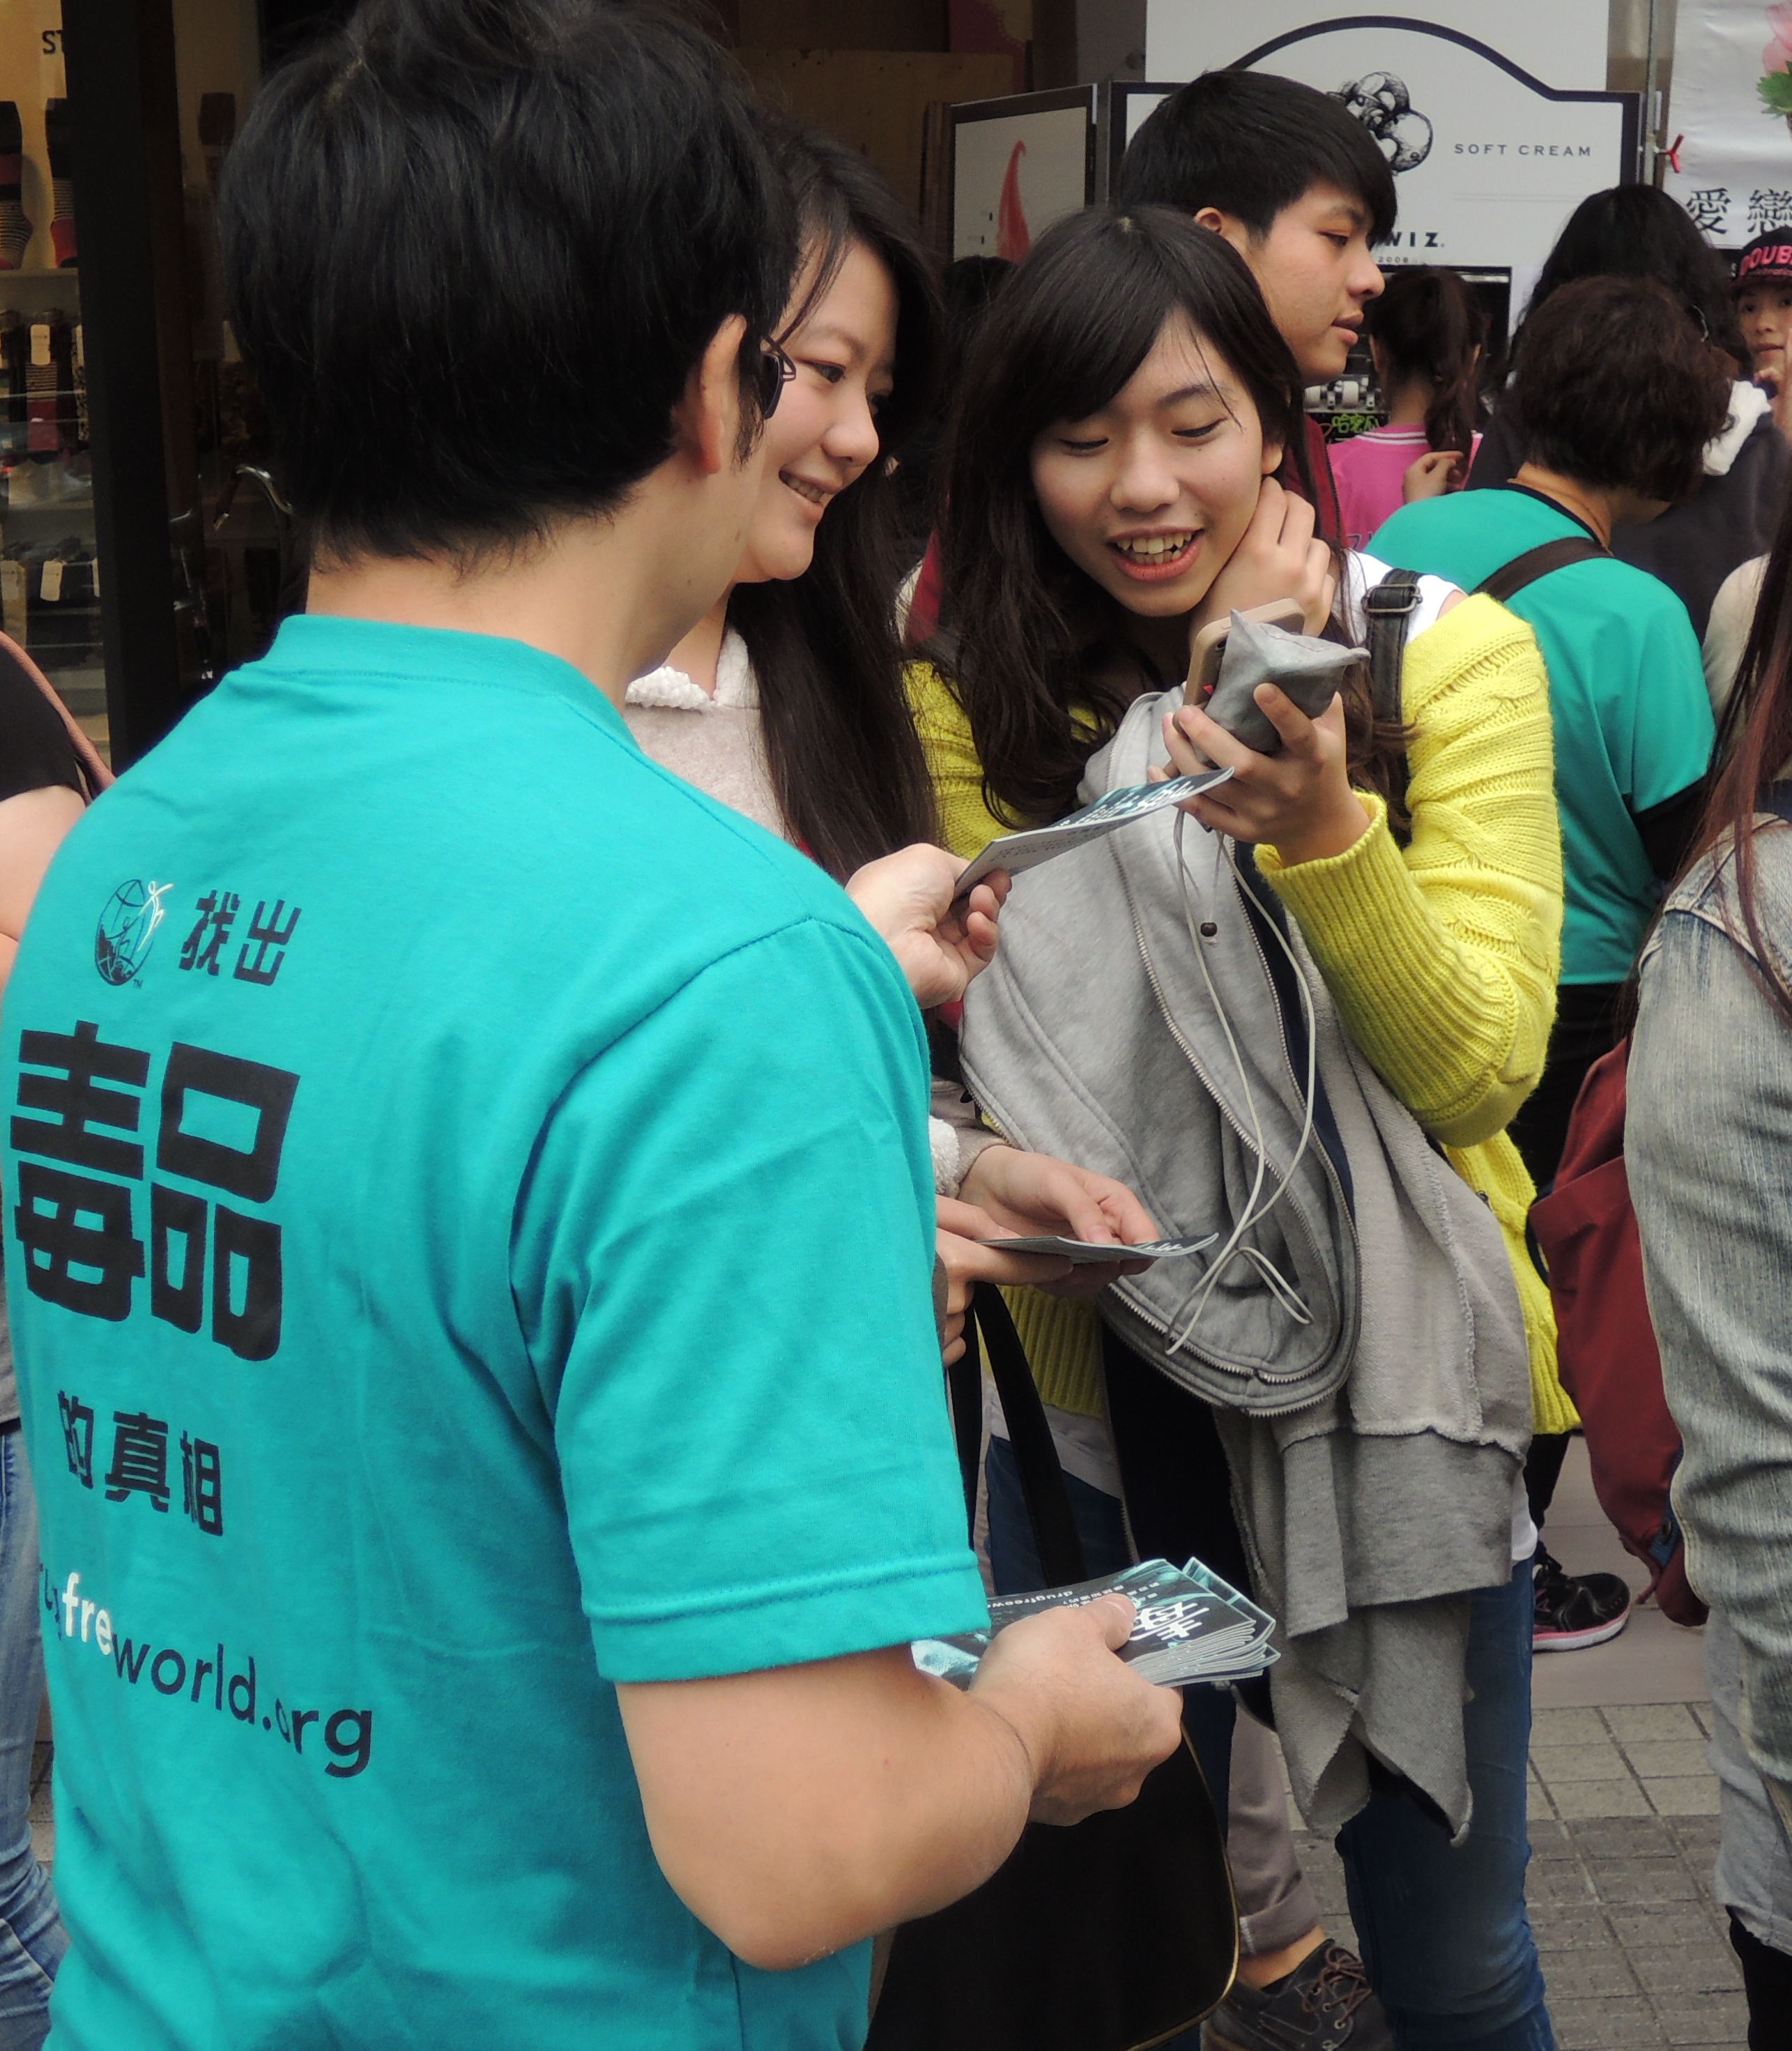 All summer long, volunteers from the Church of Scientology of Kaohsiung carry out drug education activities to get factual information about drugs into the hands of youth.